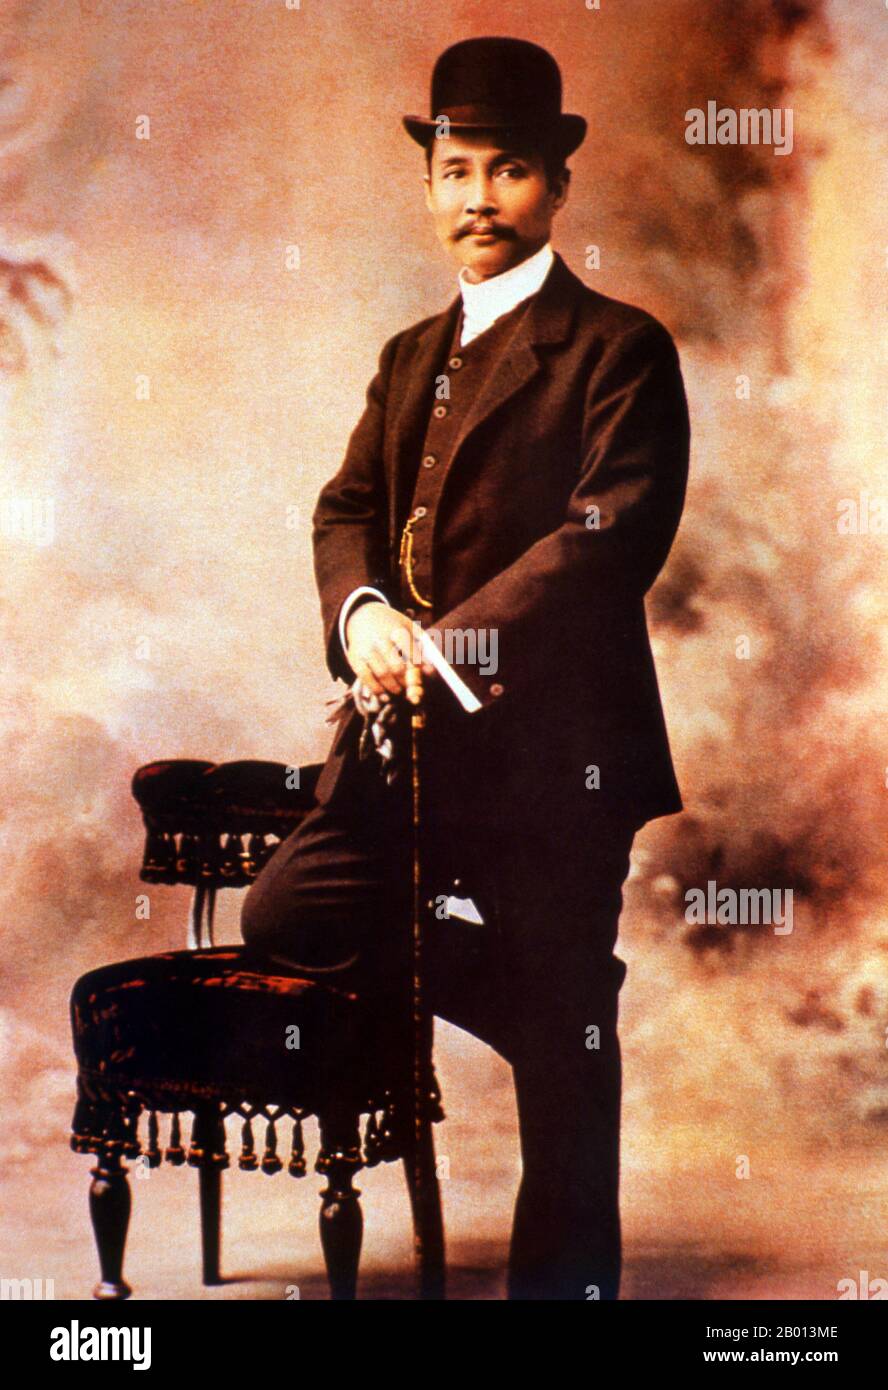 Thailand: King Rama V, Chulalongkorn (20 September 1853 – 23 October 1910), 5th monarch of the Chakri Dynasty, late 19th - early 20th century.  Phra Bat Somdet Phra Poramintharamaha Chulalongkorn Phra Chunla Chom Klao Chao Yu Hua, or Rama V was the fifth monarch of Siam under the House of Chakri. He is considered one of the greatest kings of Siam. His reign was characterised by the modernisation of Siam, immense government and social reforms, and territorial cessions to the British Empire and French Indochina, saving Siam from being colonised. Stock Photo